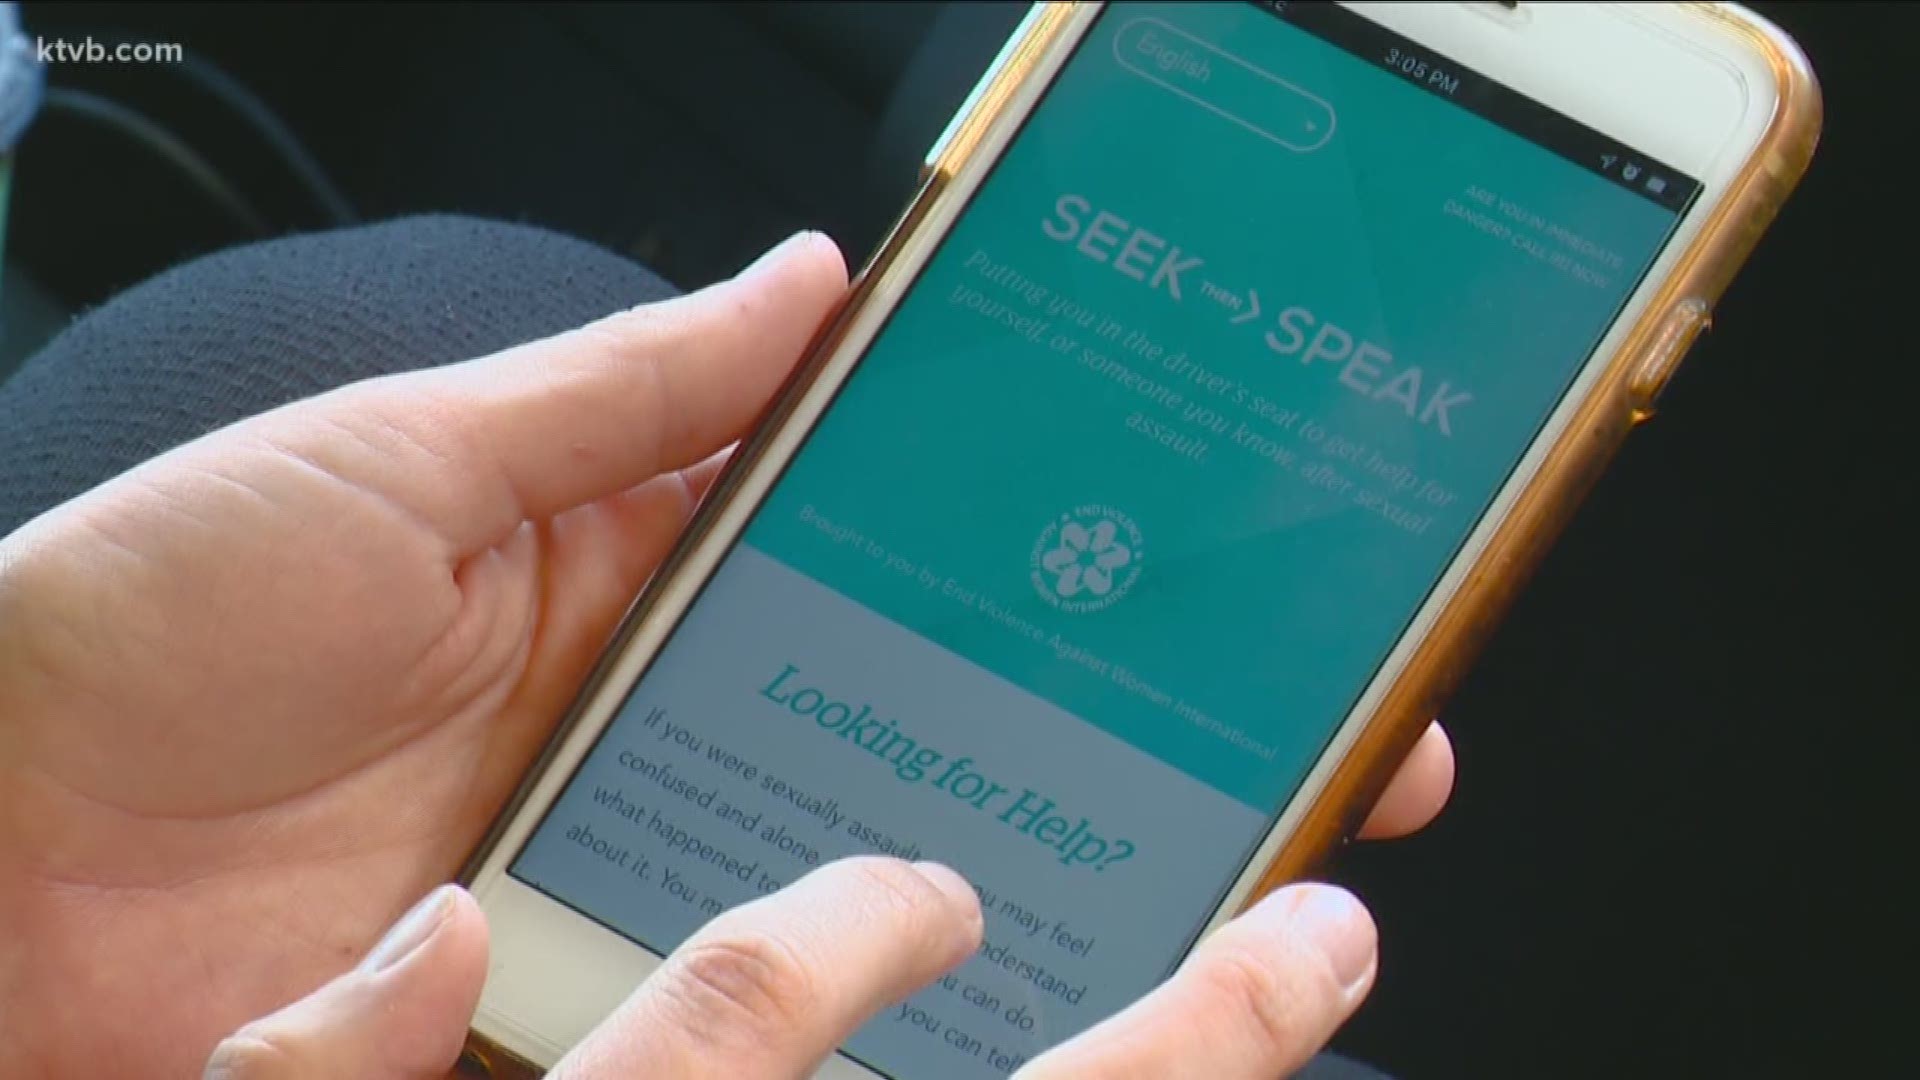 The app walks victims through important steps toward help and healing.